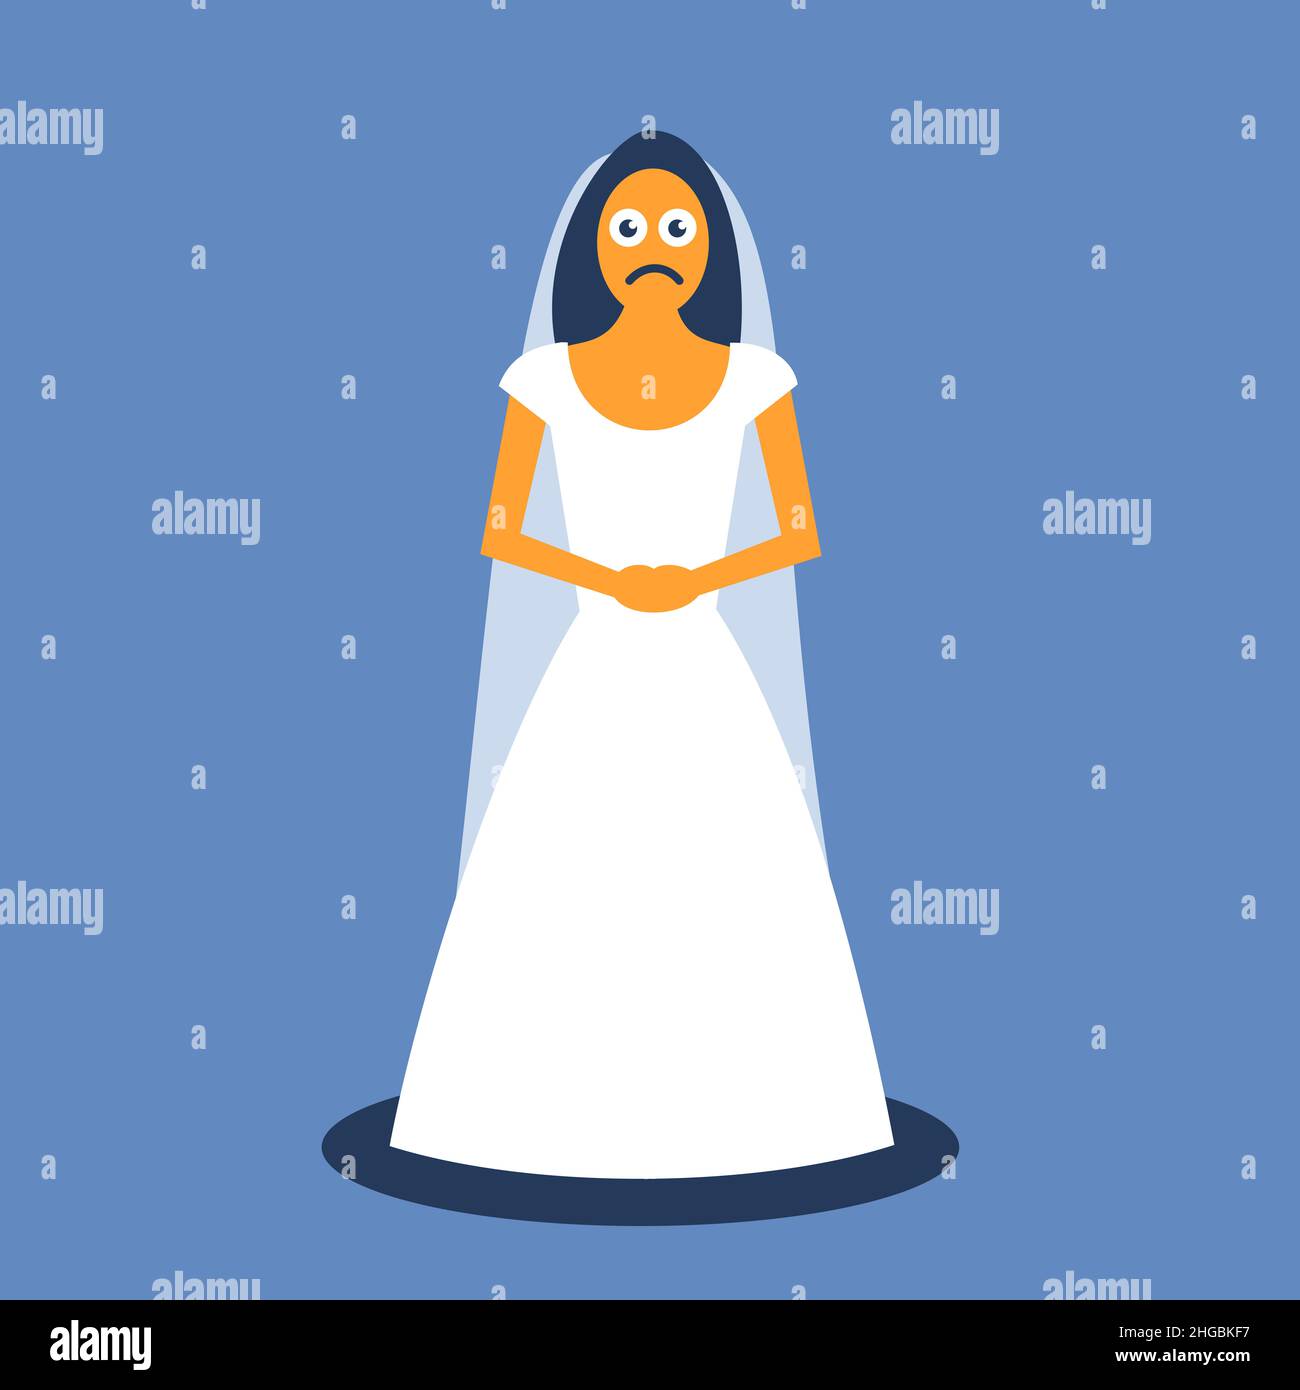 Abandoned bride - sad, unhappy and miserable woman wearing wedding dress is standing alone and lonely without groom. Frowning face. Vector illustratio Stock Photo